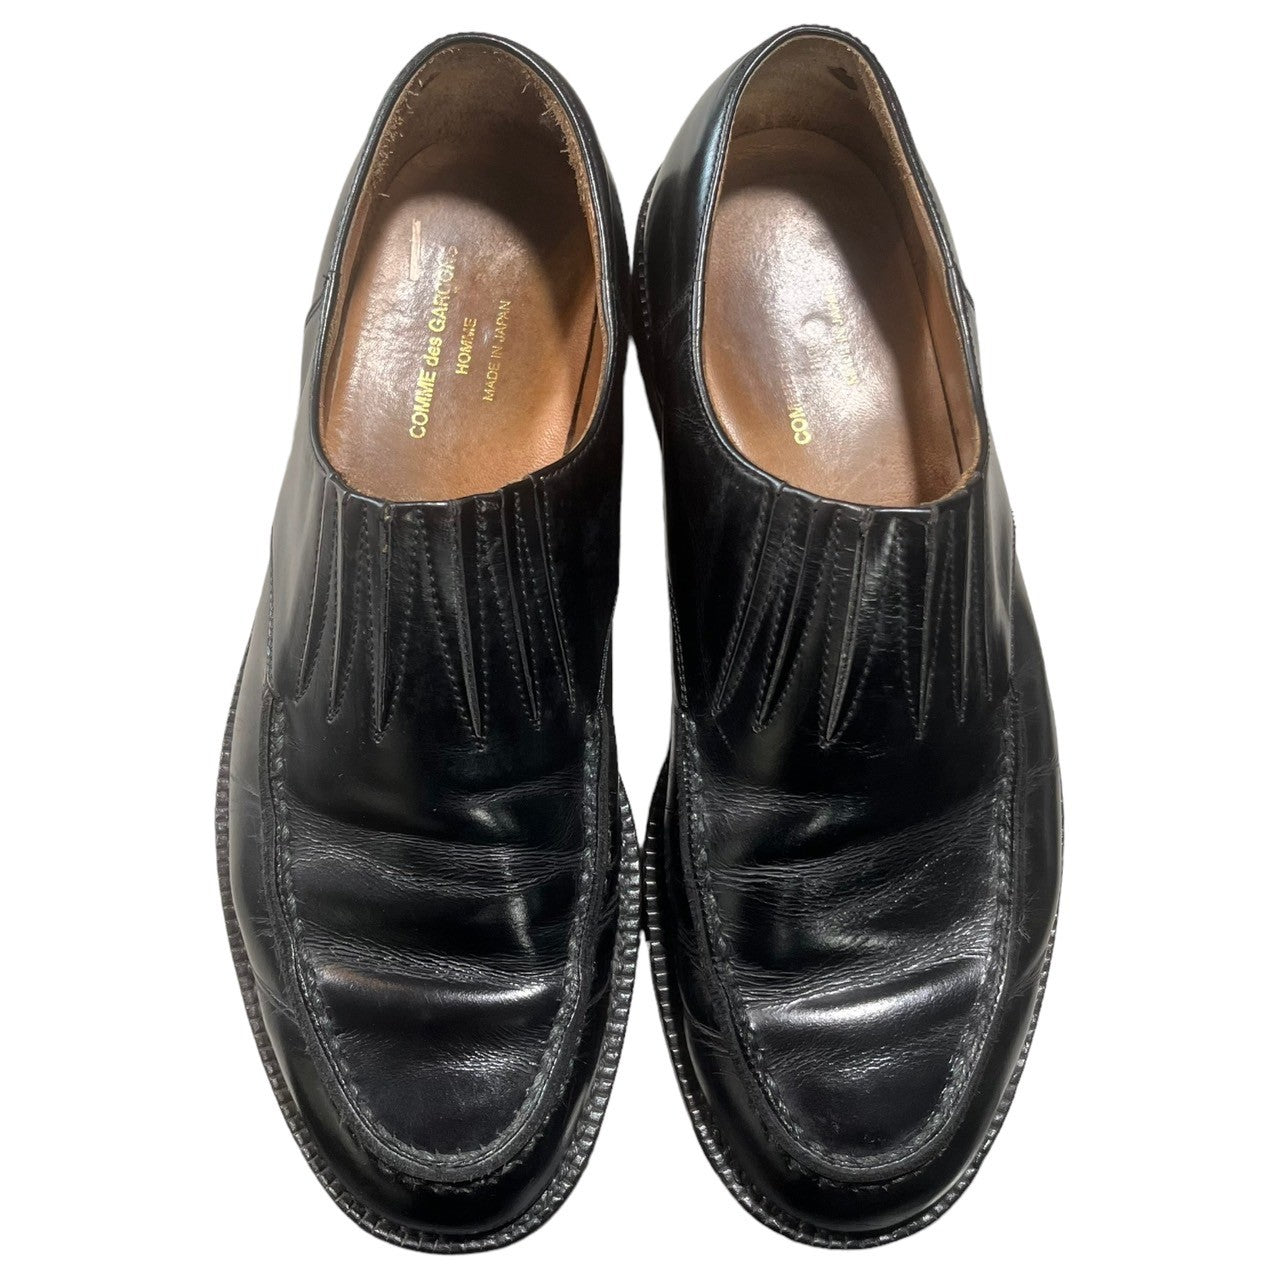 COMME des GARCONS HOMME(コムデギャルソンオム) 00s front gore leather shoes/フロントゴアレザーシューズ/革靴 SIZE 24 1/2 ブラック 日本製